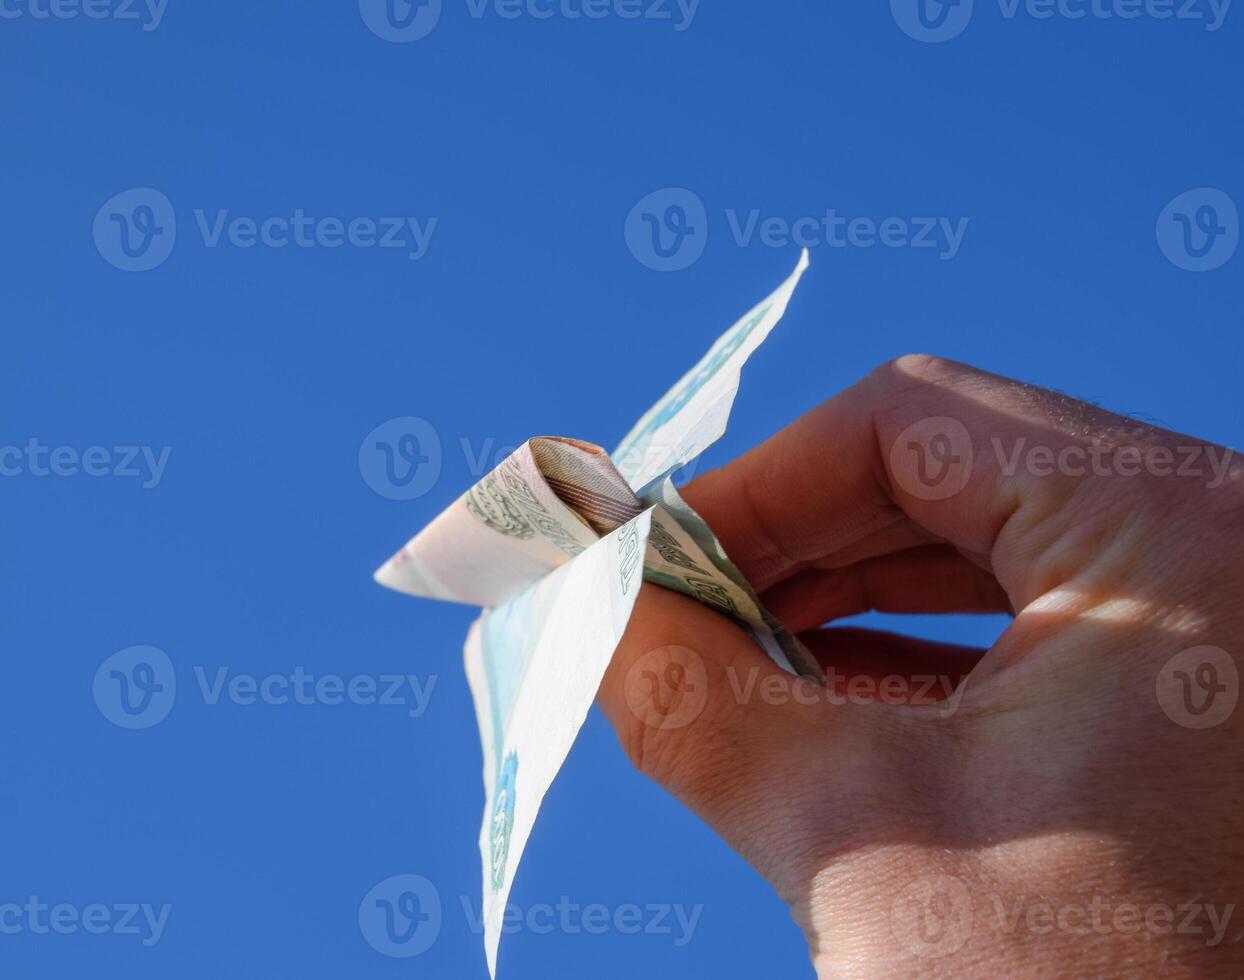 Denominations of Russian money, folded in the airplane against the blue sky in hand photo